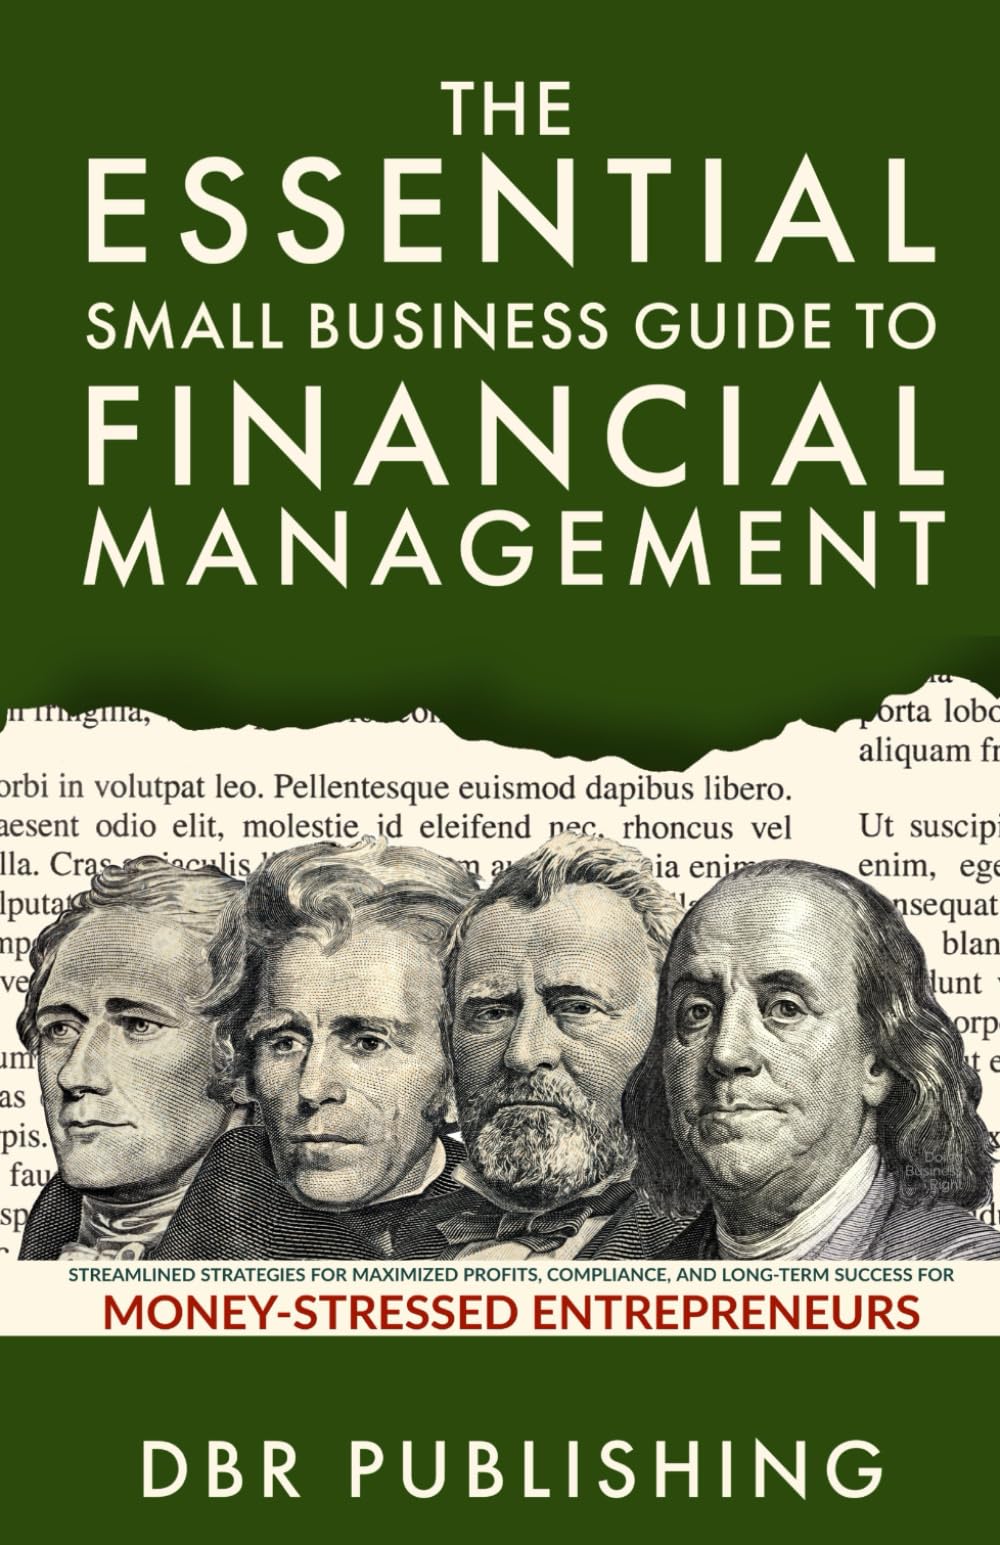 The Essential Small Business Guide to Financial Management: Streamlined Strategies for Maximized Profits, Compliance, and Long-Term Success for Money-Stressed Entrepreneurs